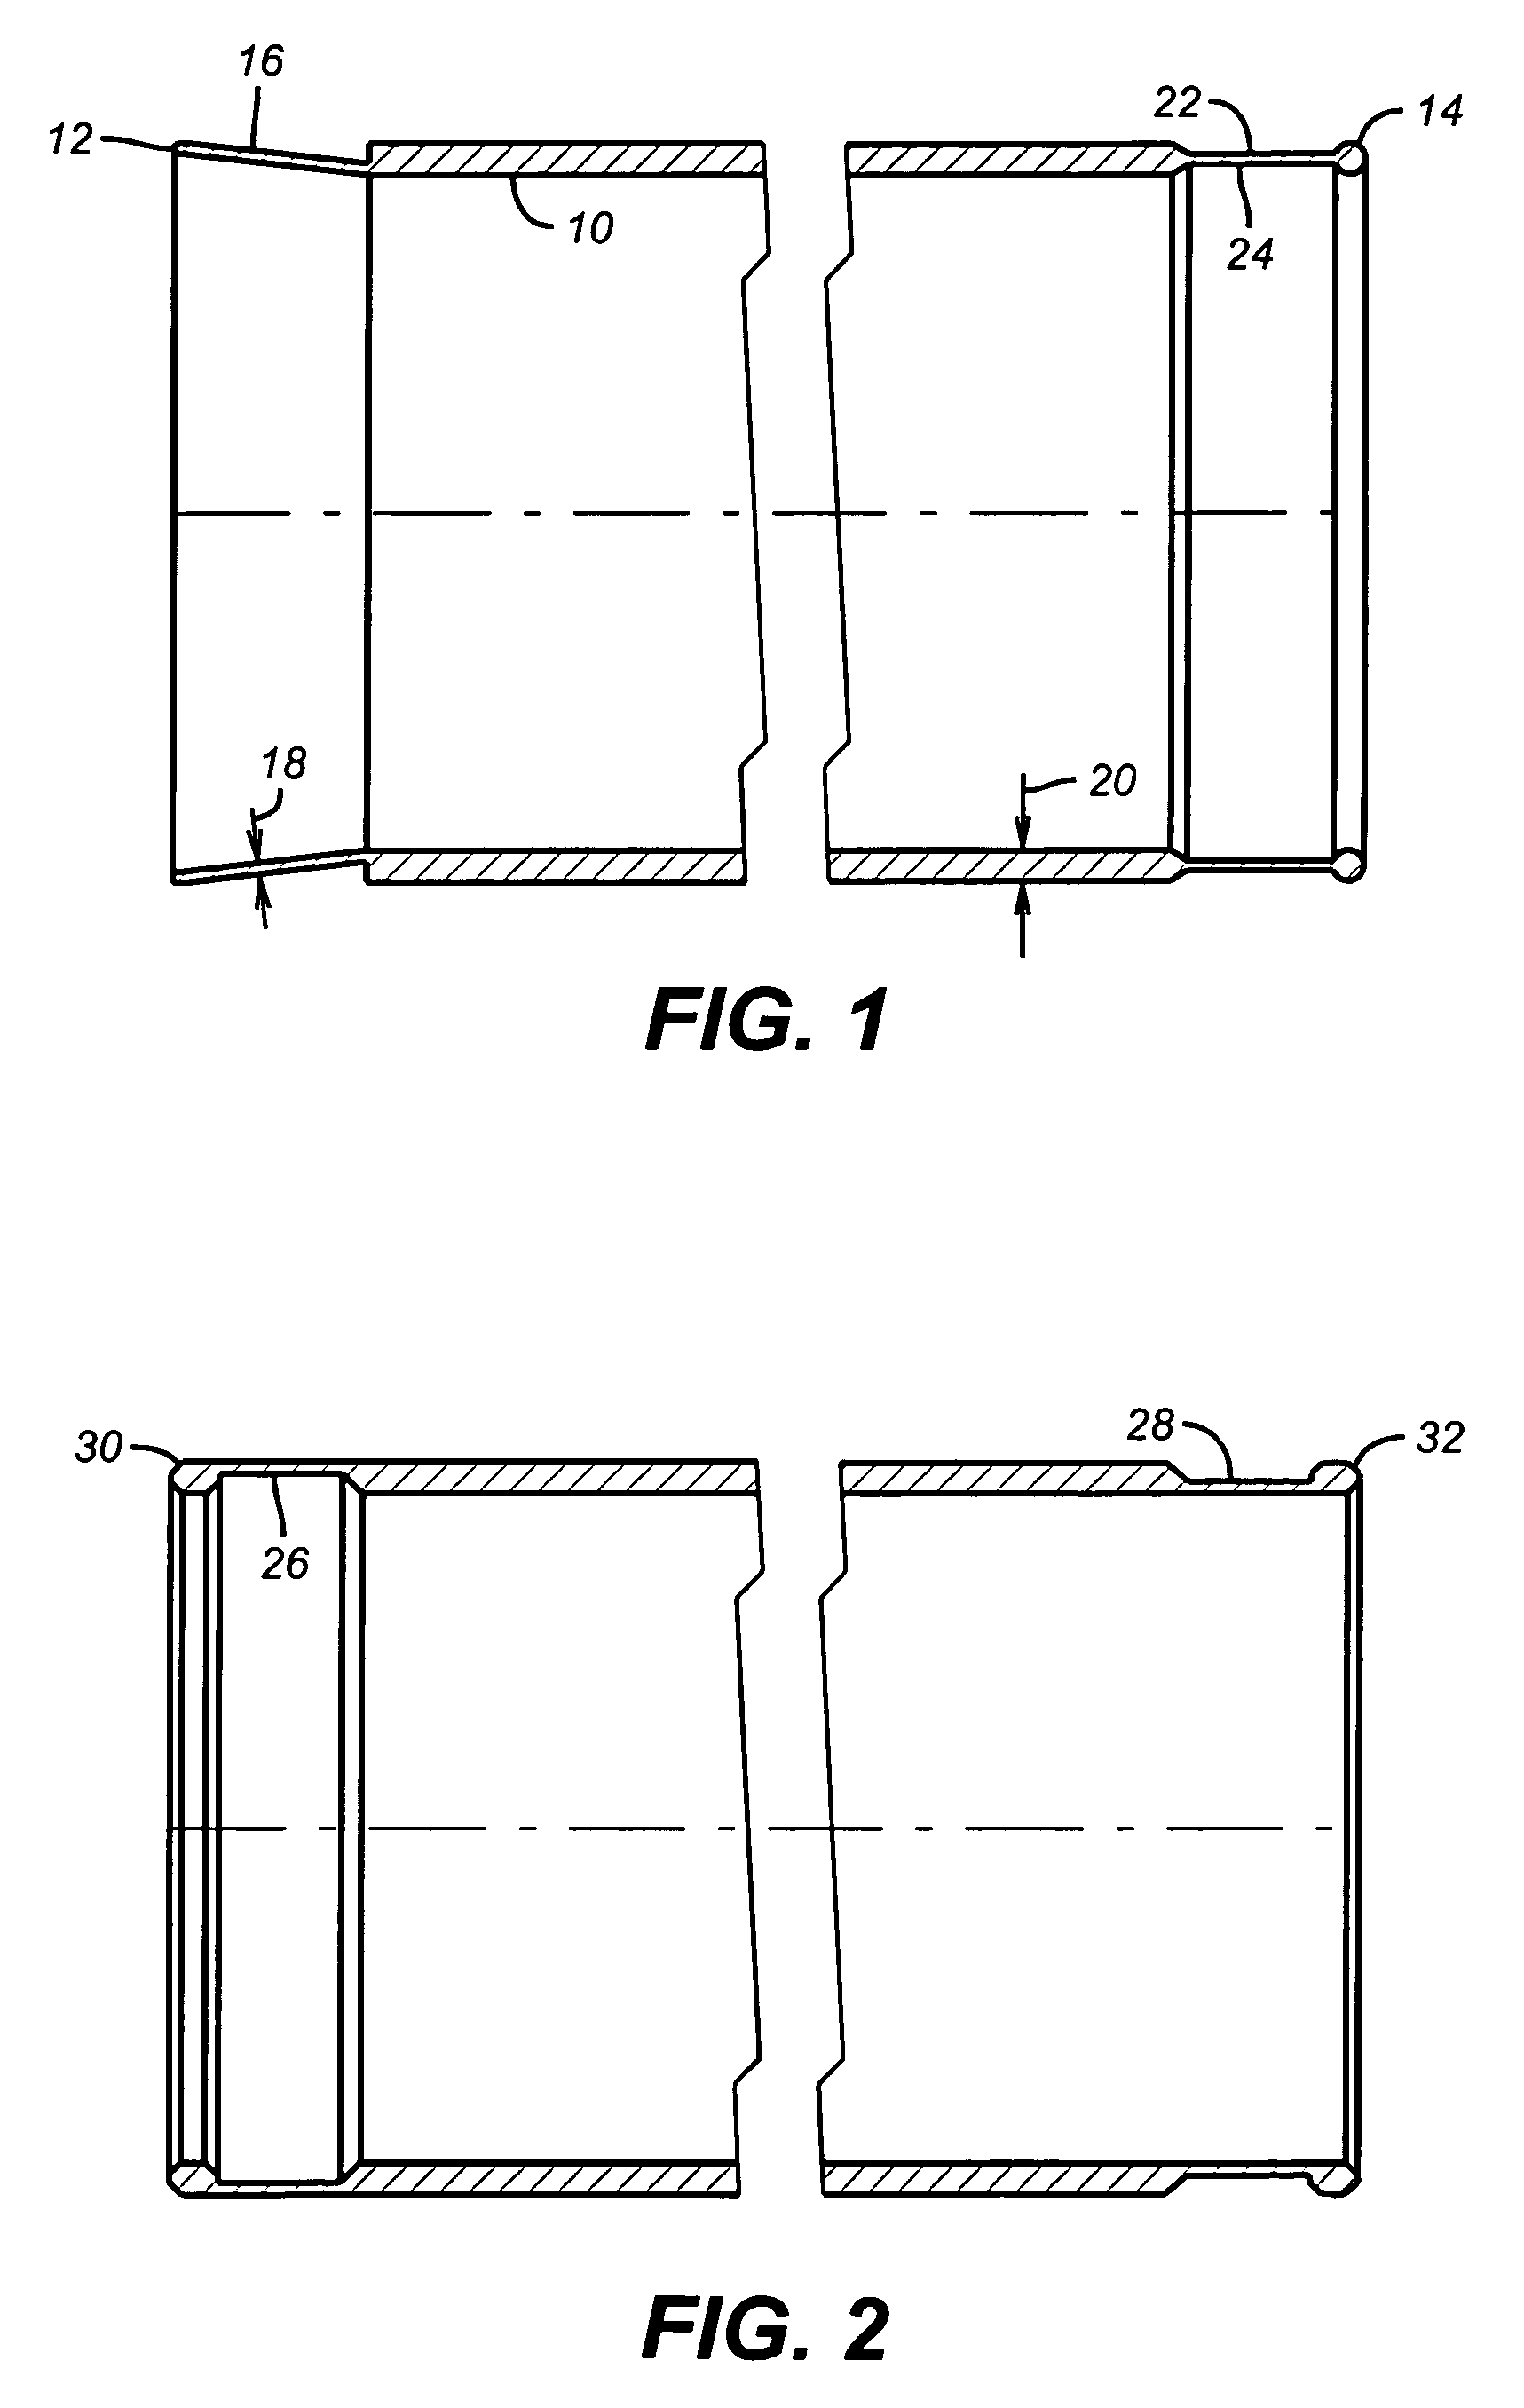 Method for reducing diameter reduction near ends of expanded tubulars